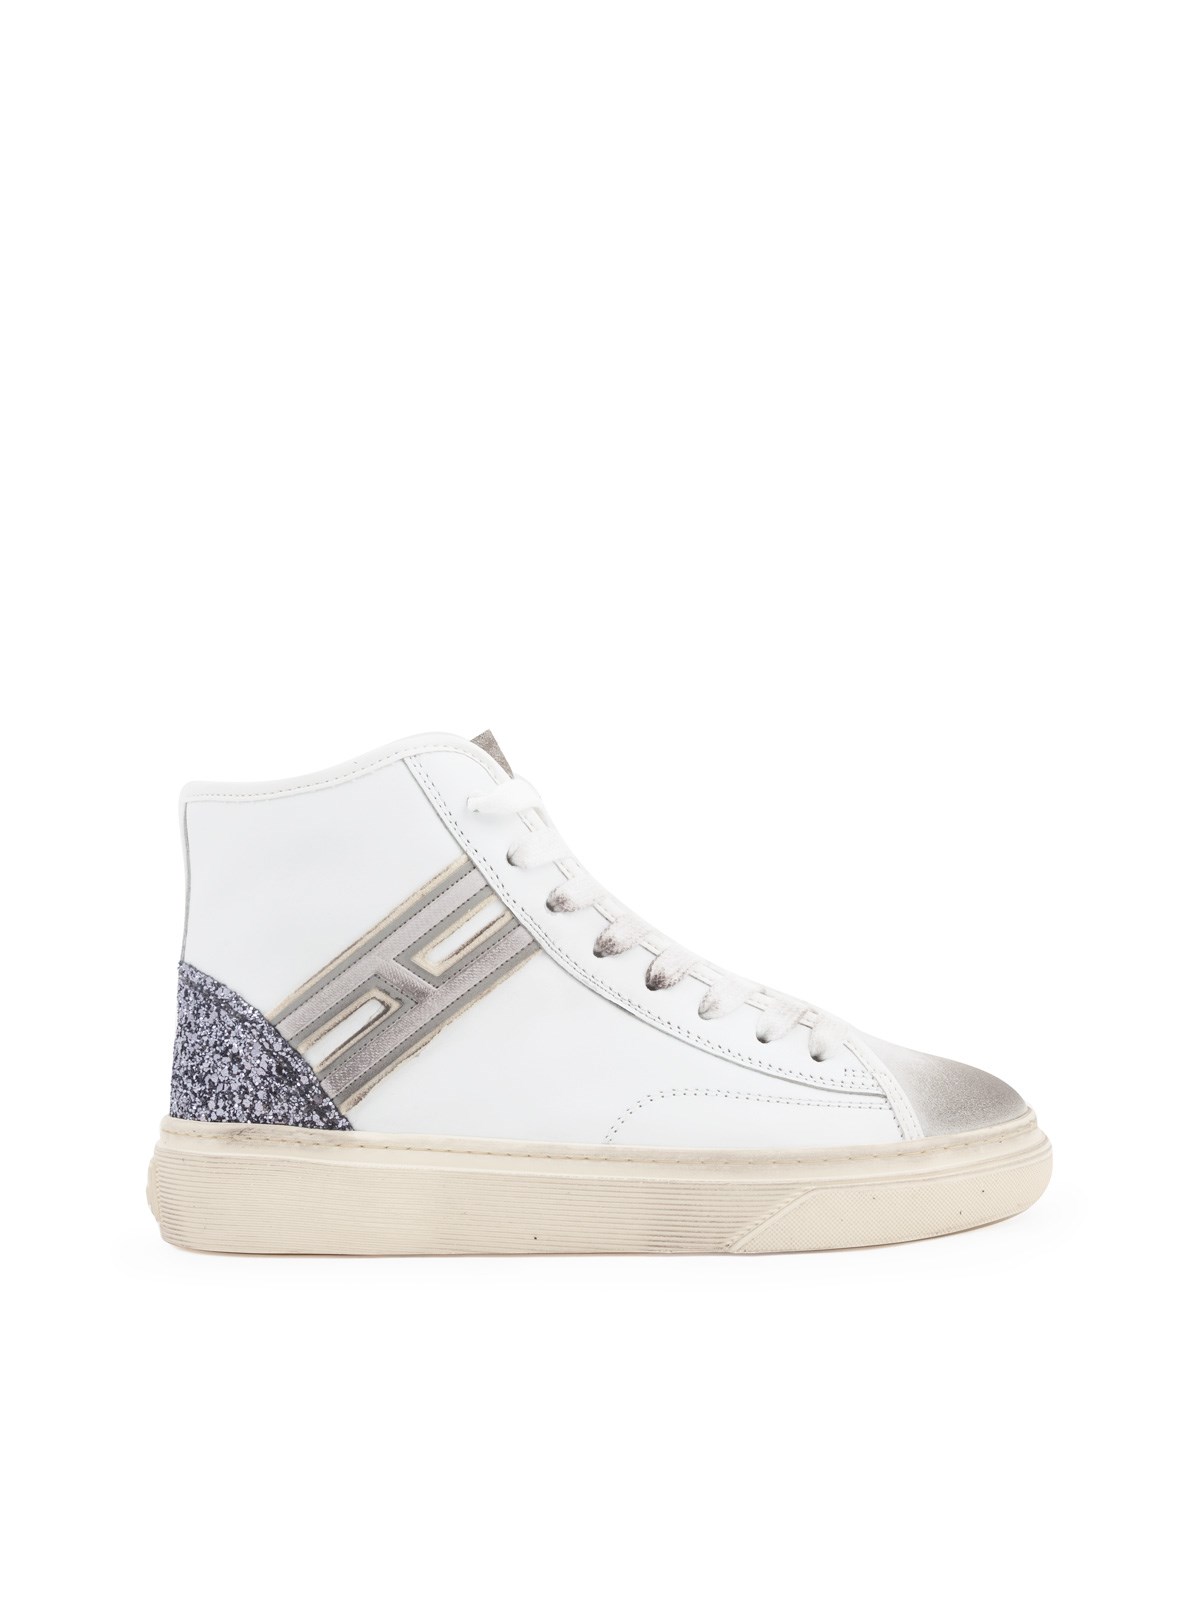 analyse Ontmoedigd zijn Ham hogan LACE-UP HI TOPS SNEAKERS WITH GLITTER DETAIL available on  montiboutique.com - 20782